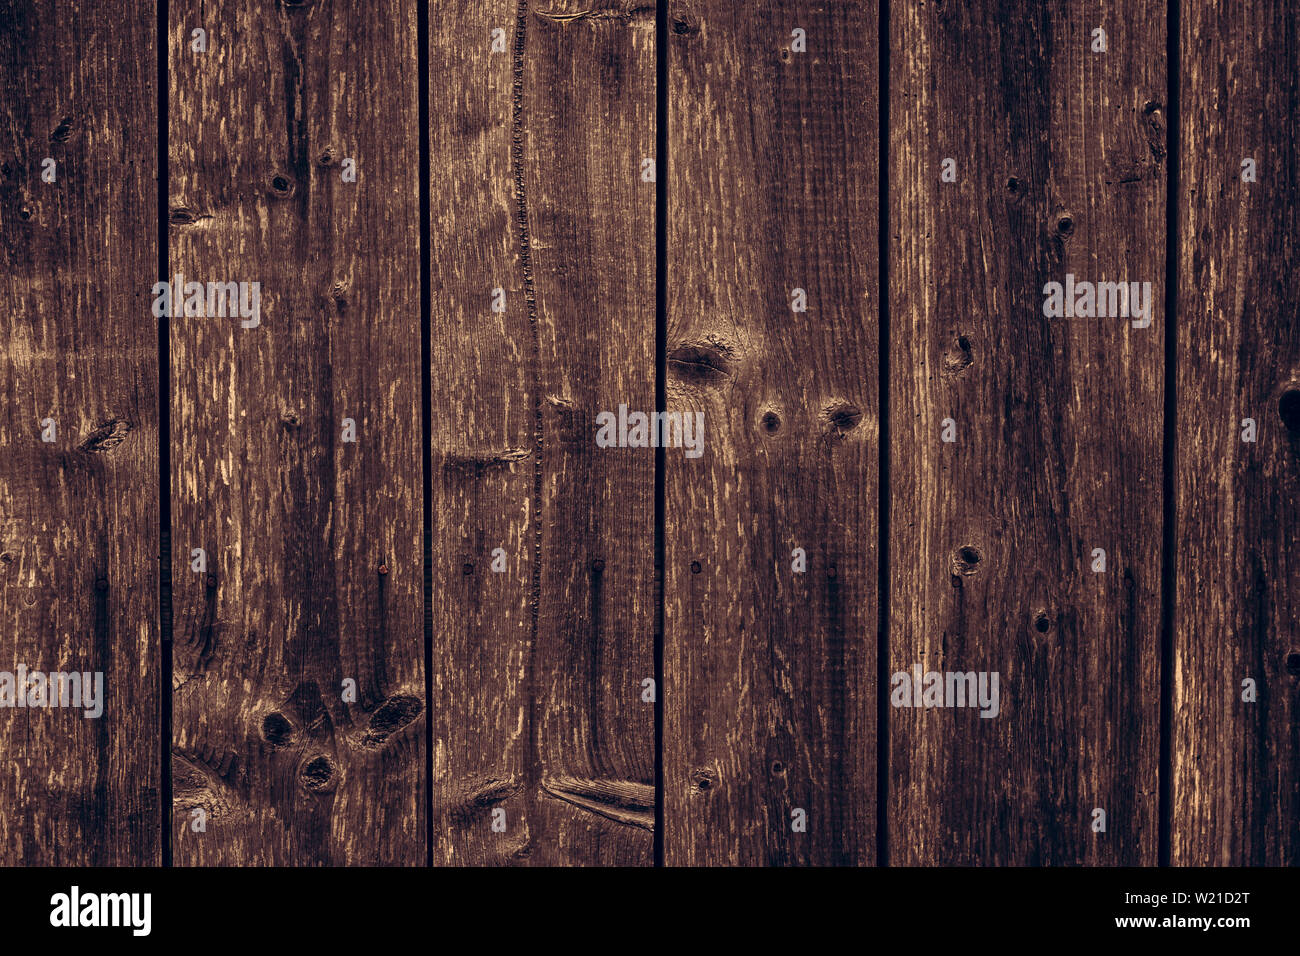 Scrap-booking Background on Dark Wood Stock Image - Image of dirty